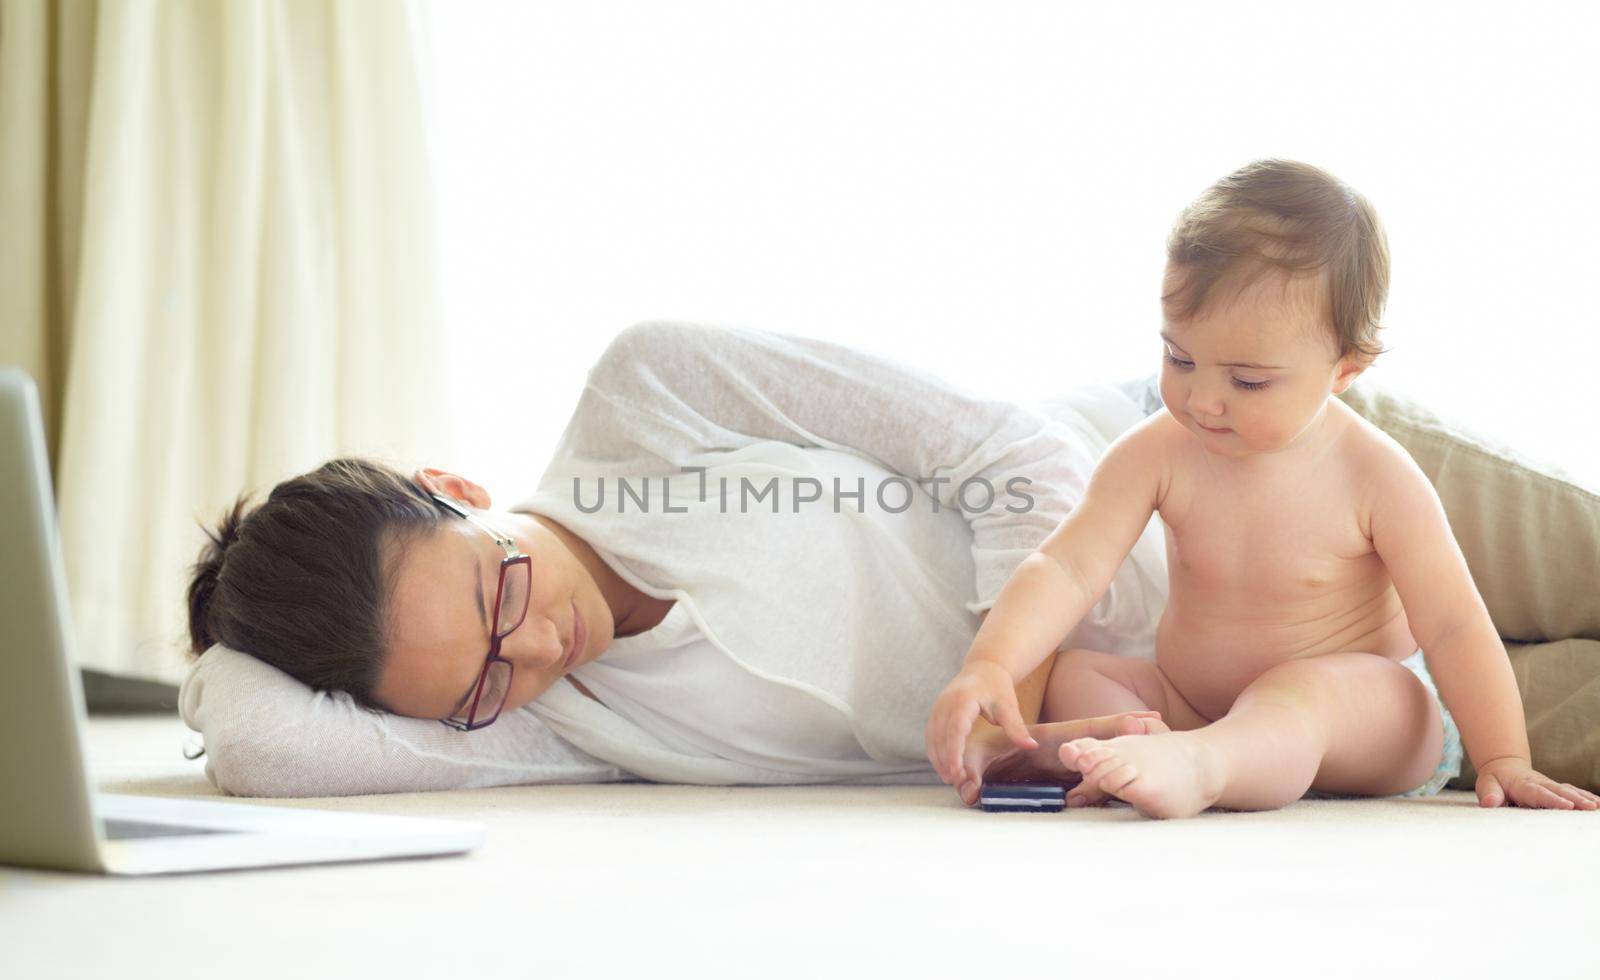 An exhausted young mother lying asleep on the floor with her baby sitting next to her.